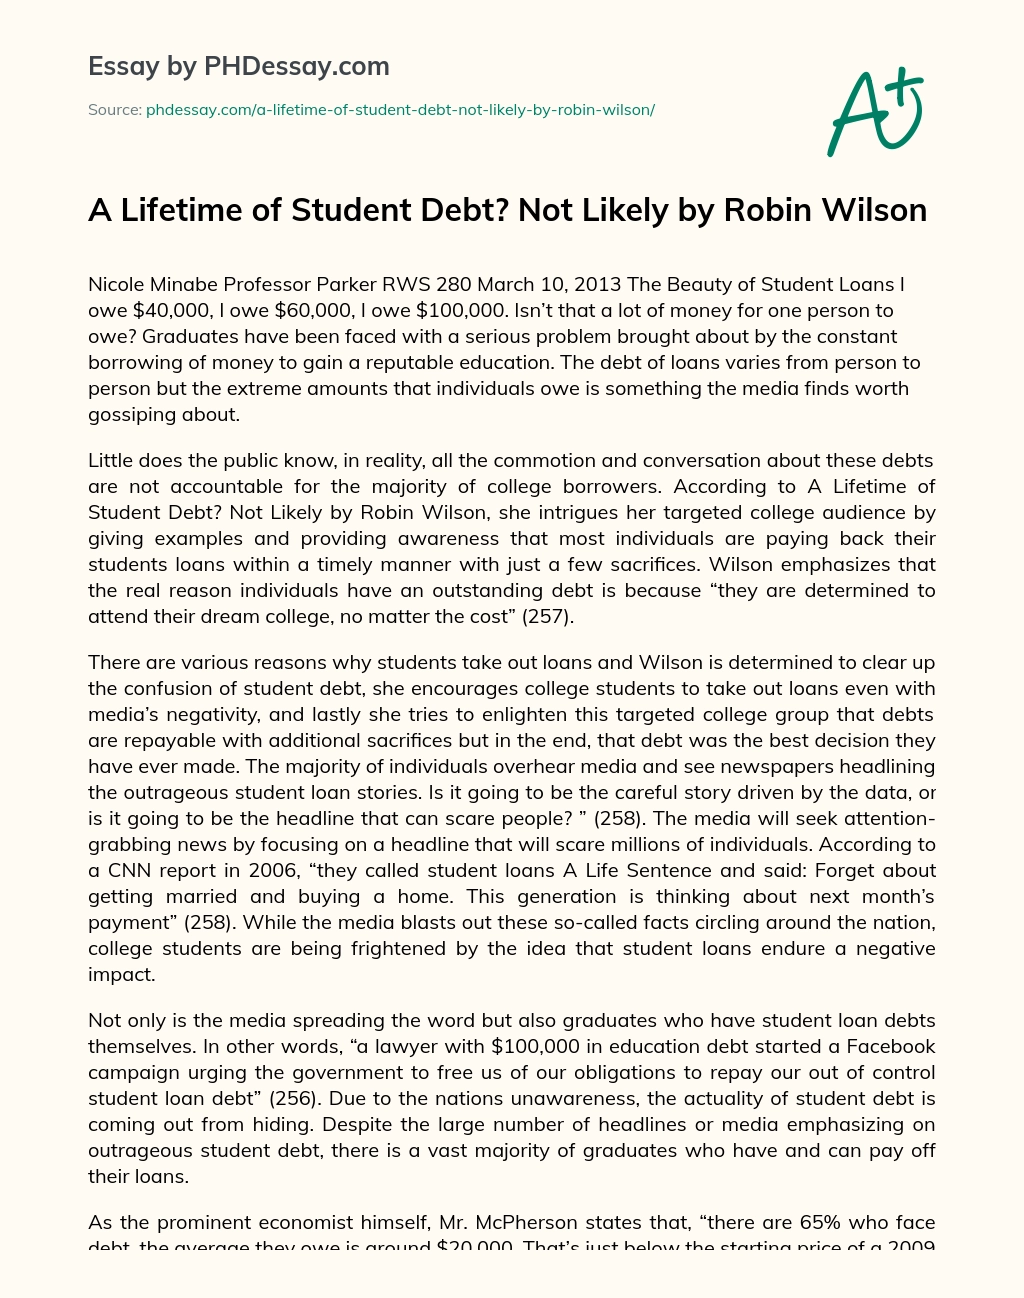 A Lifetime of Student Debt? Not Likely by Robin Wilson essay